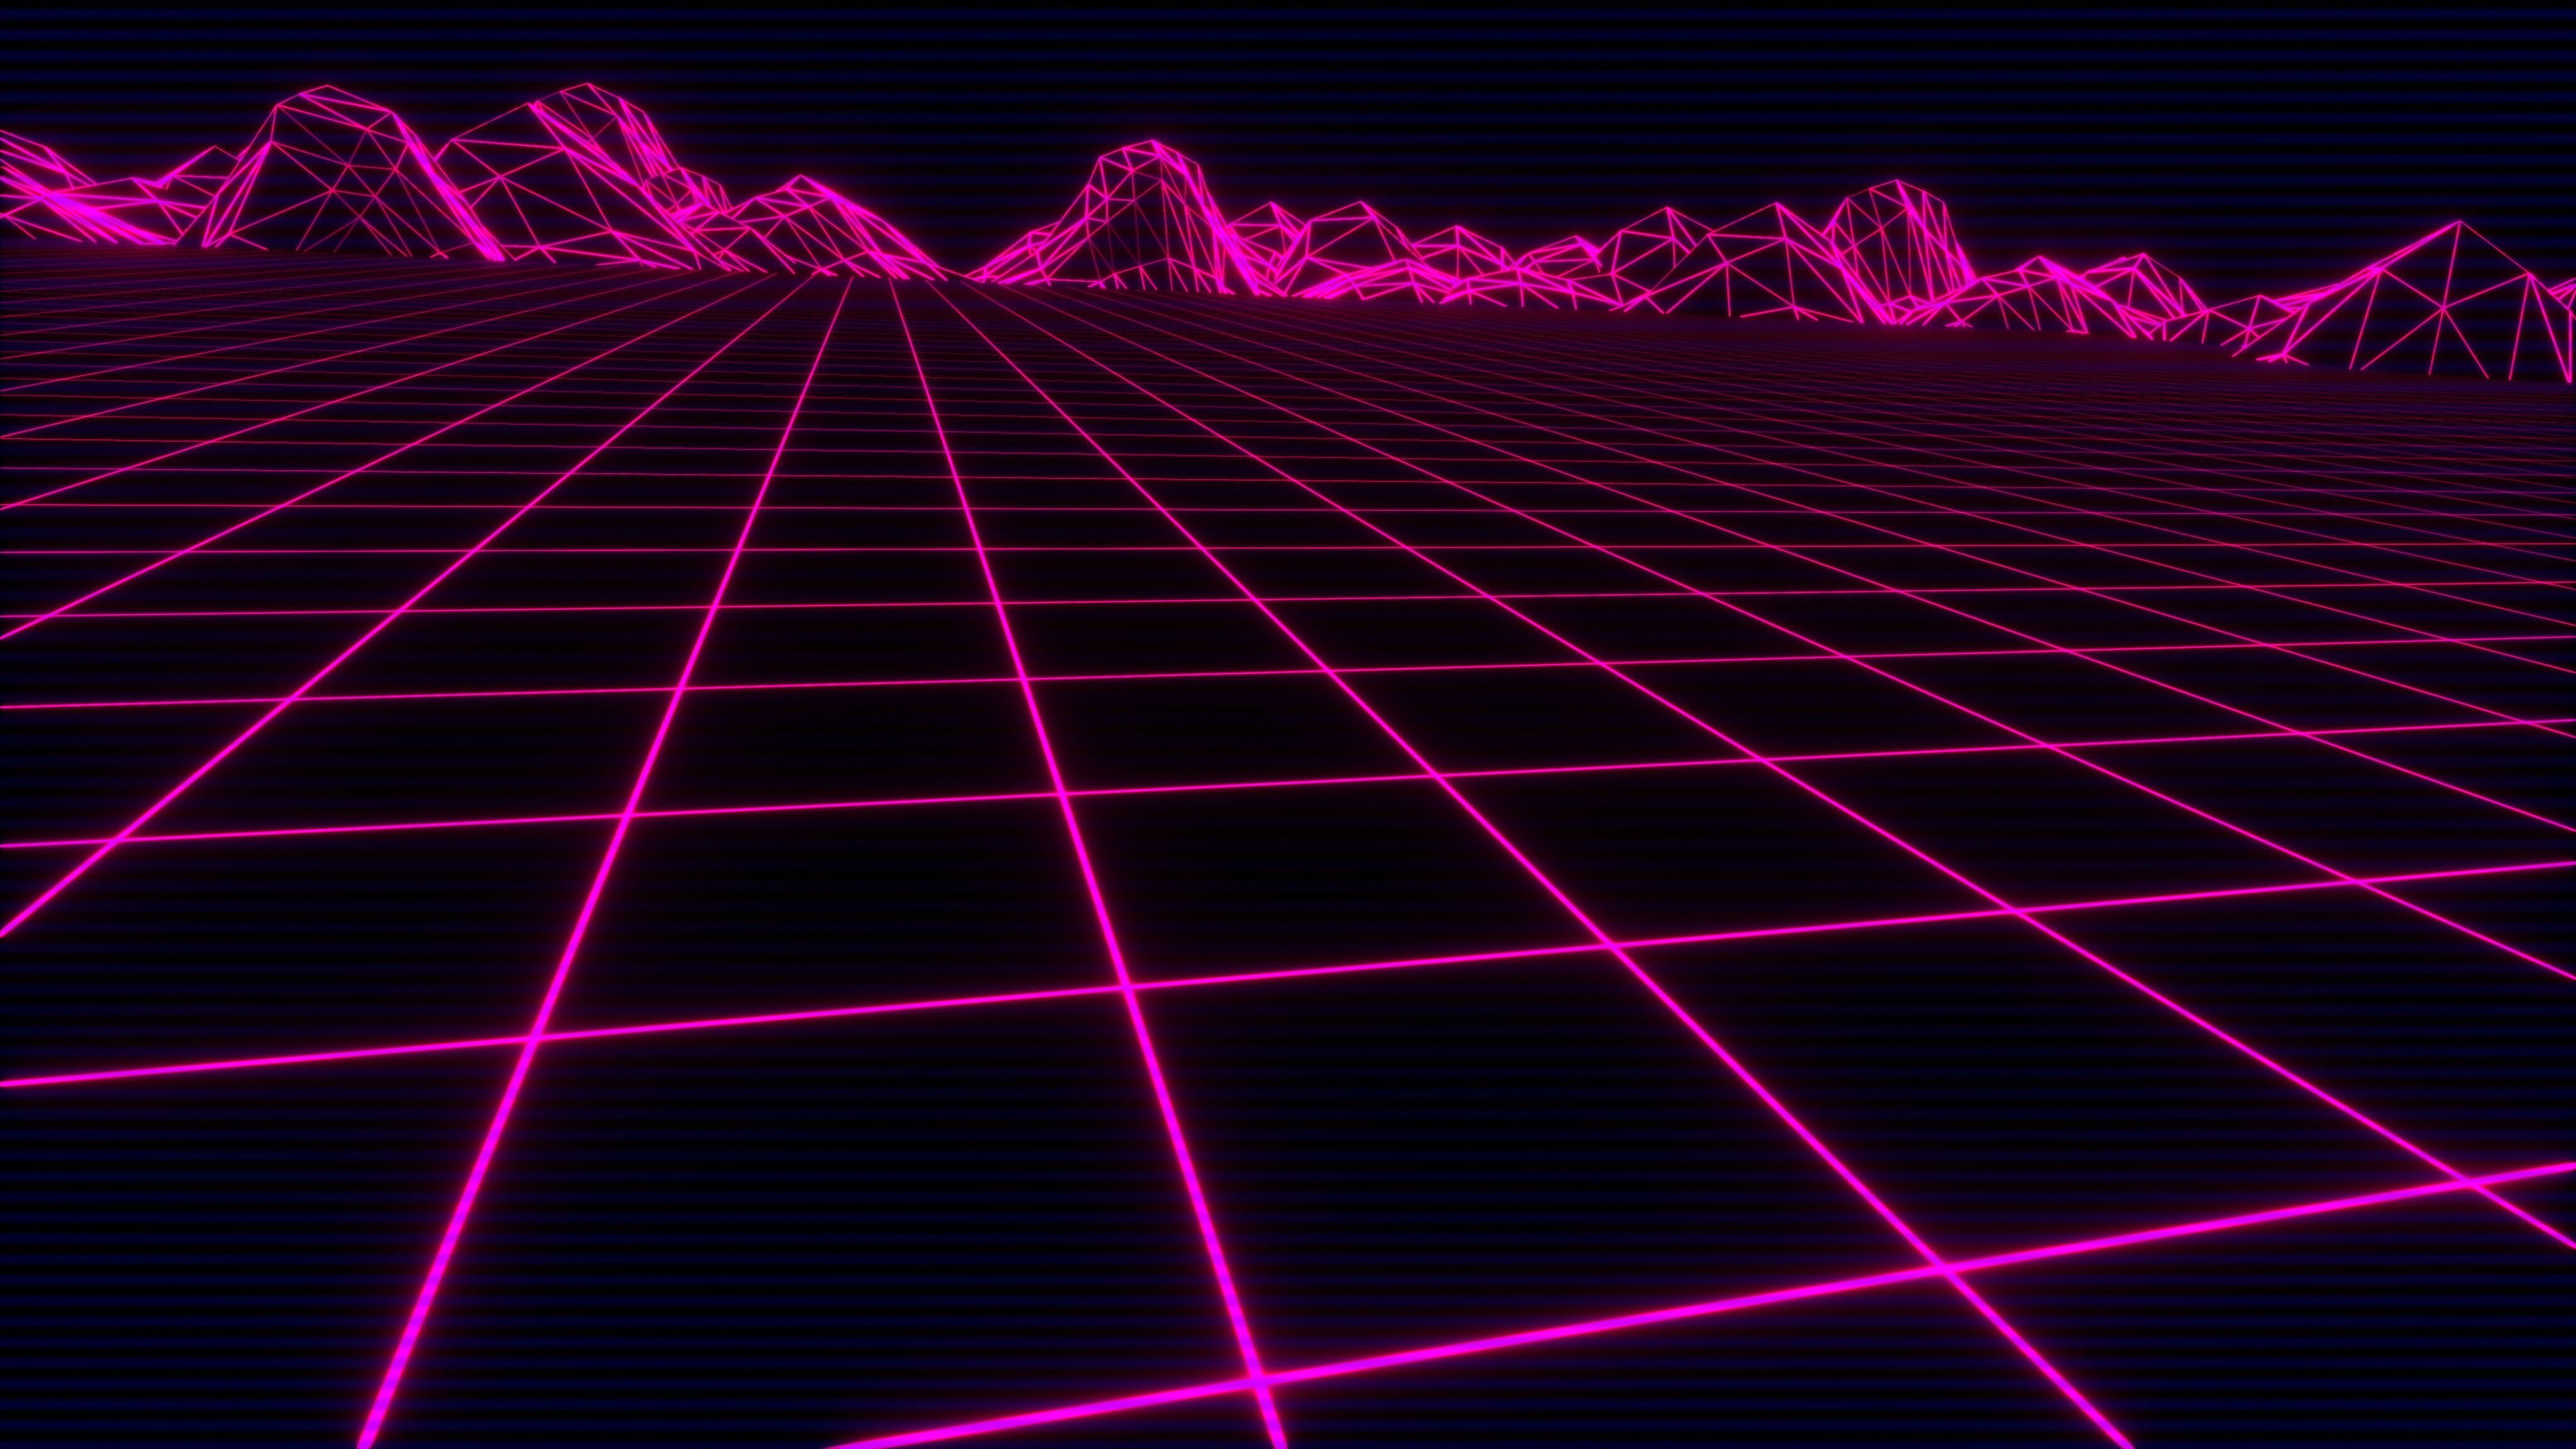 Background #Neon #VHS #Synth #Retrowave #Synthwave New Retro Wave